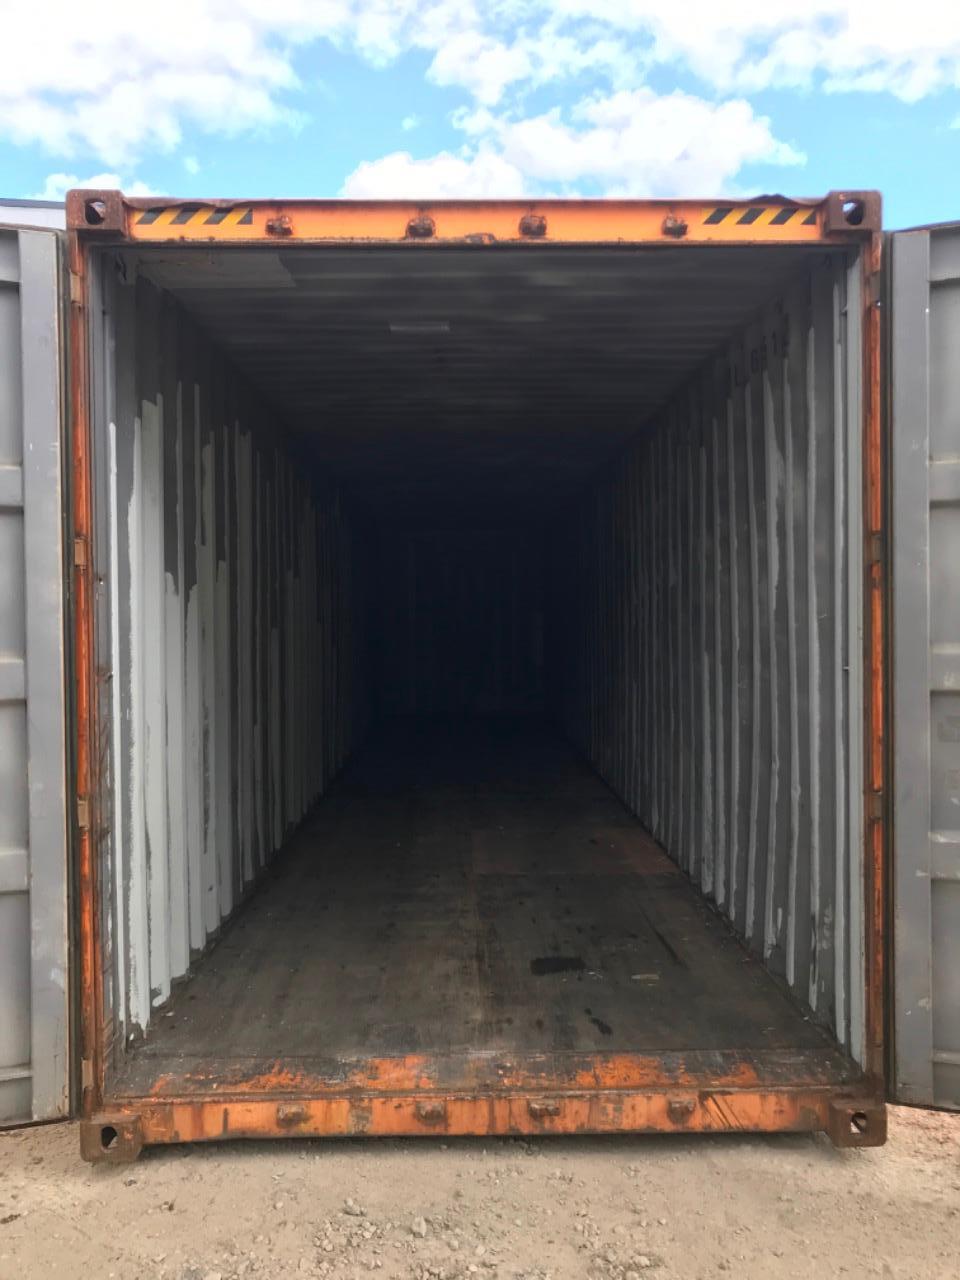 40 fods HC Container - ID: HLXU 655514-2 - ( St...